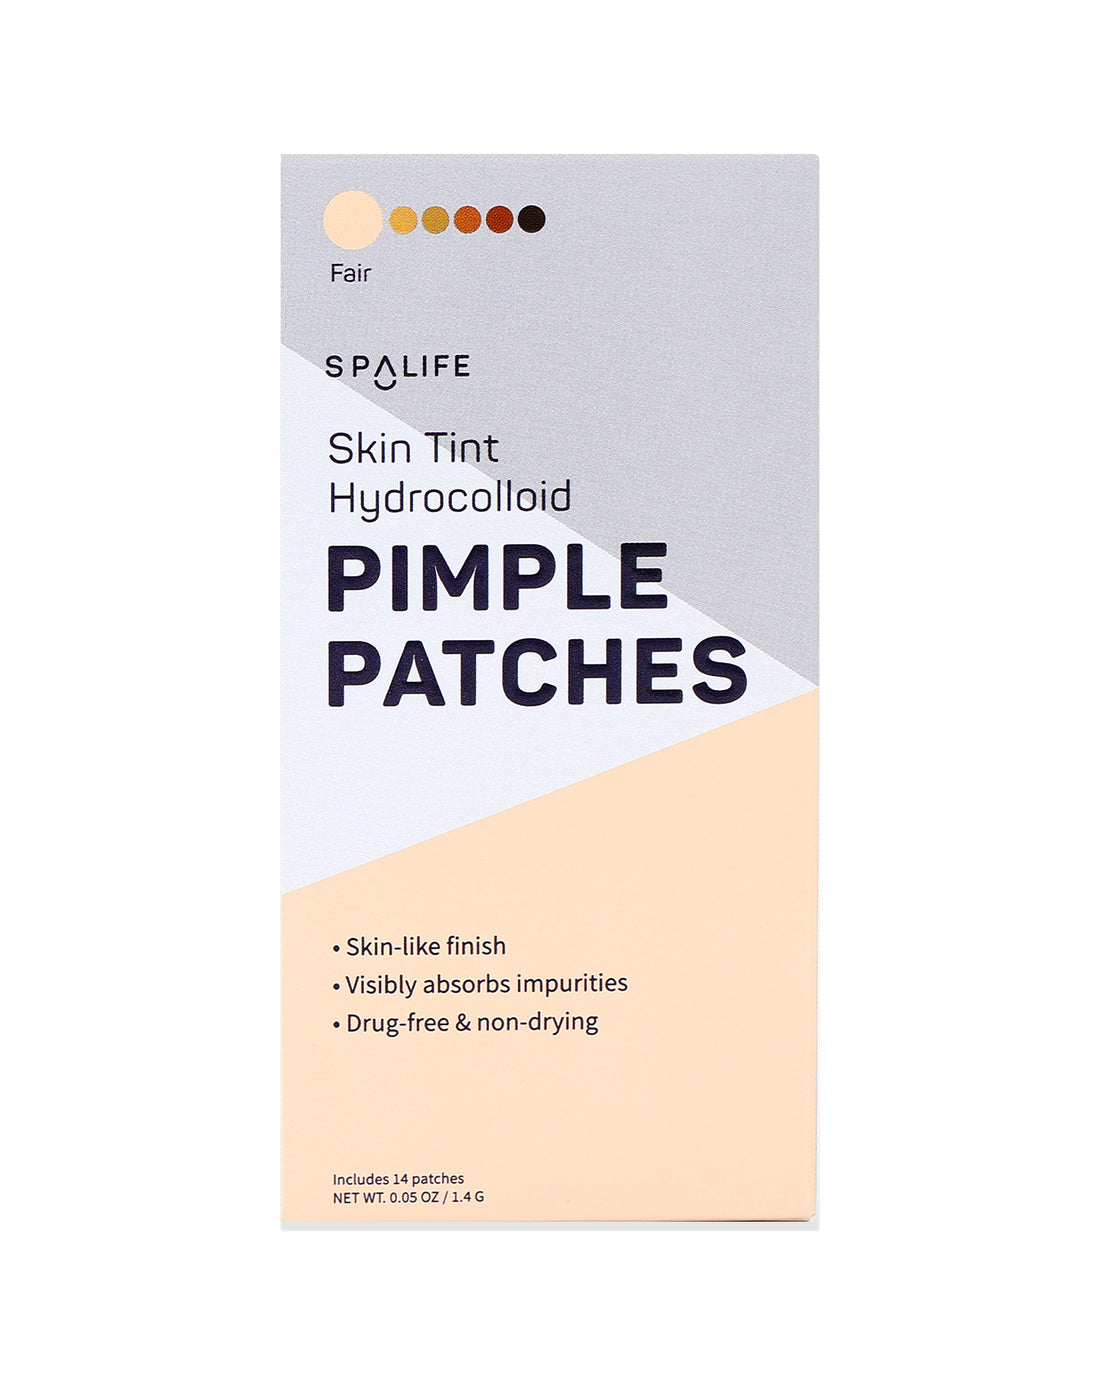 Skin_tint_pimple_patches_packe-785